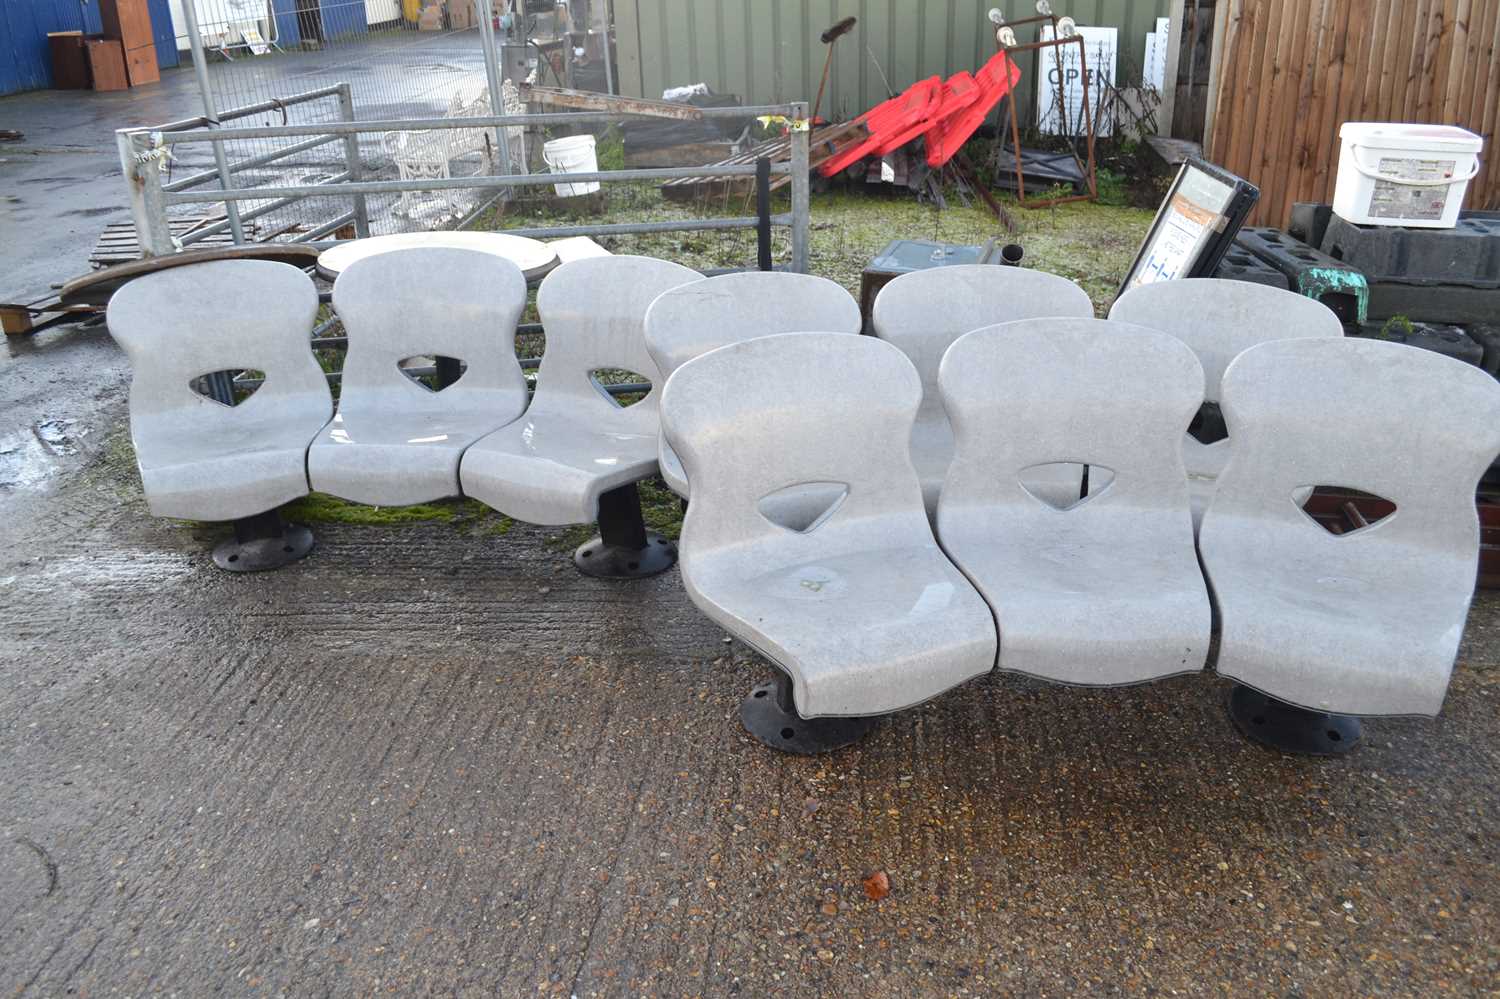 Three heavy duty commercial curved three seater benches together with a table